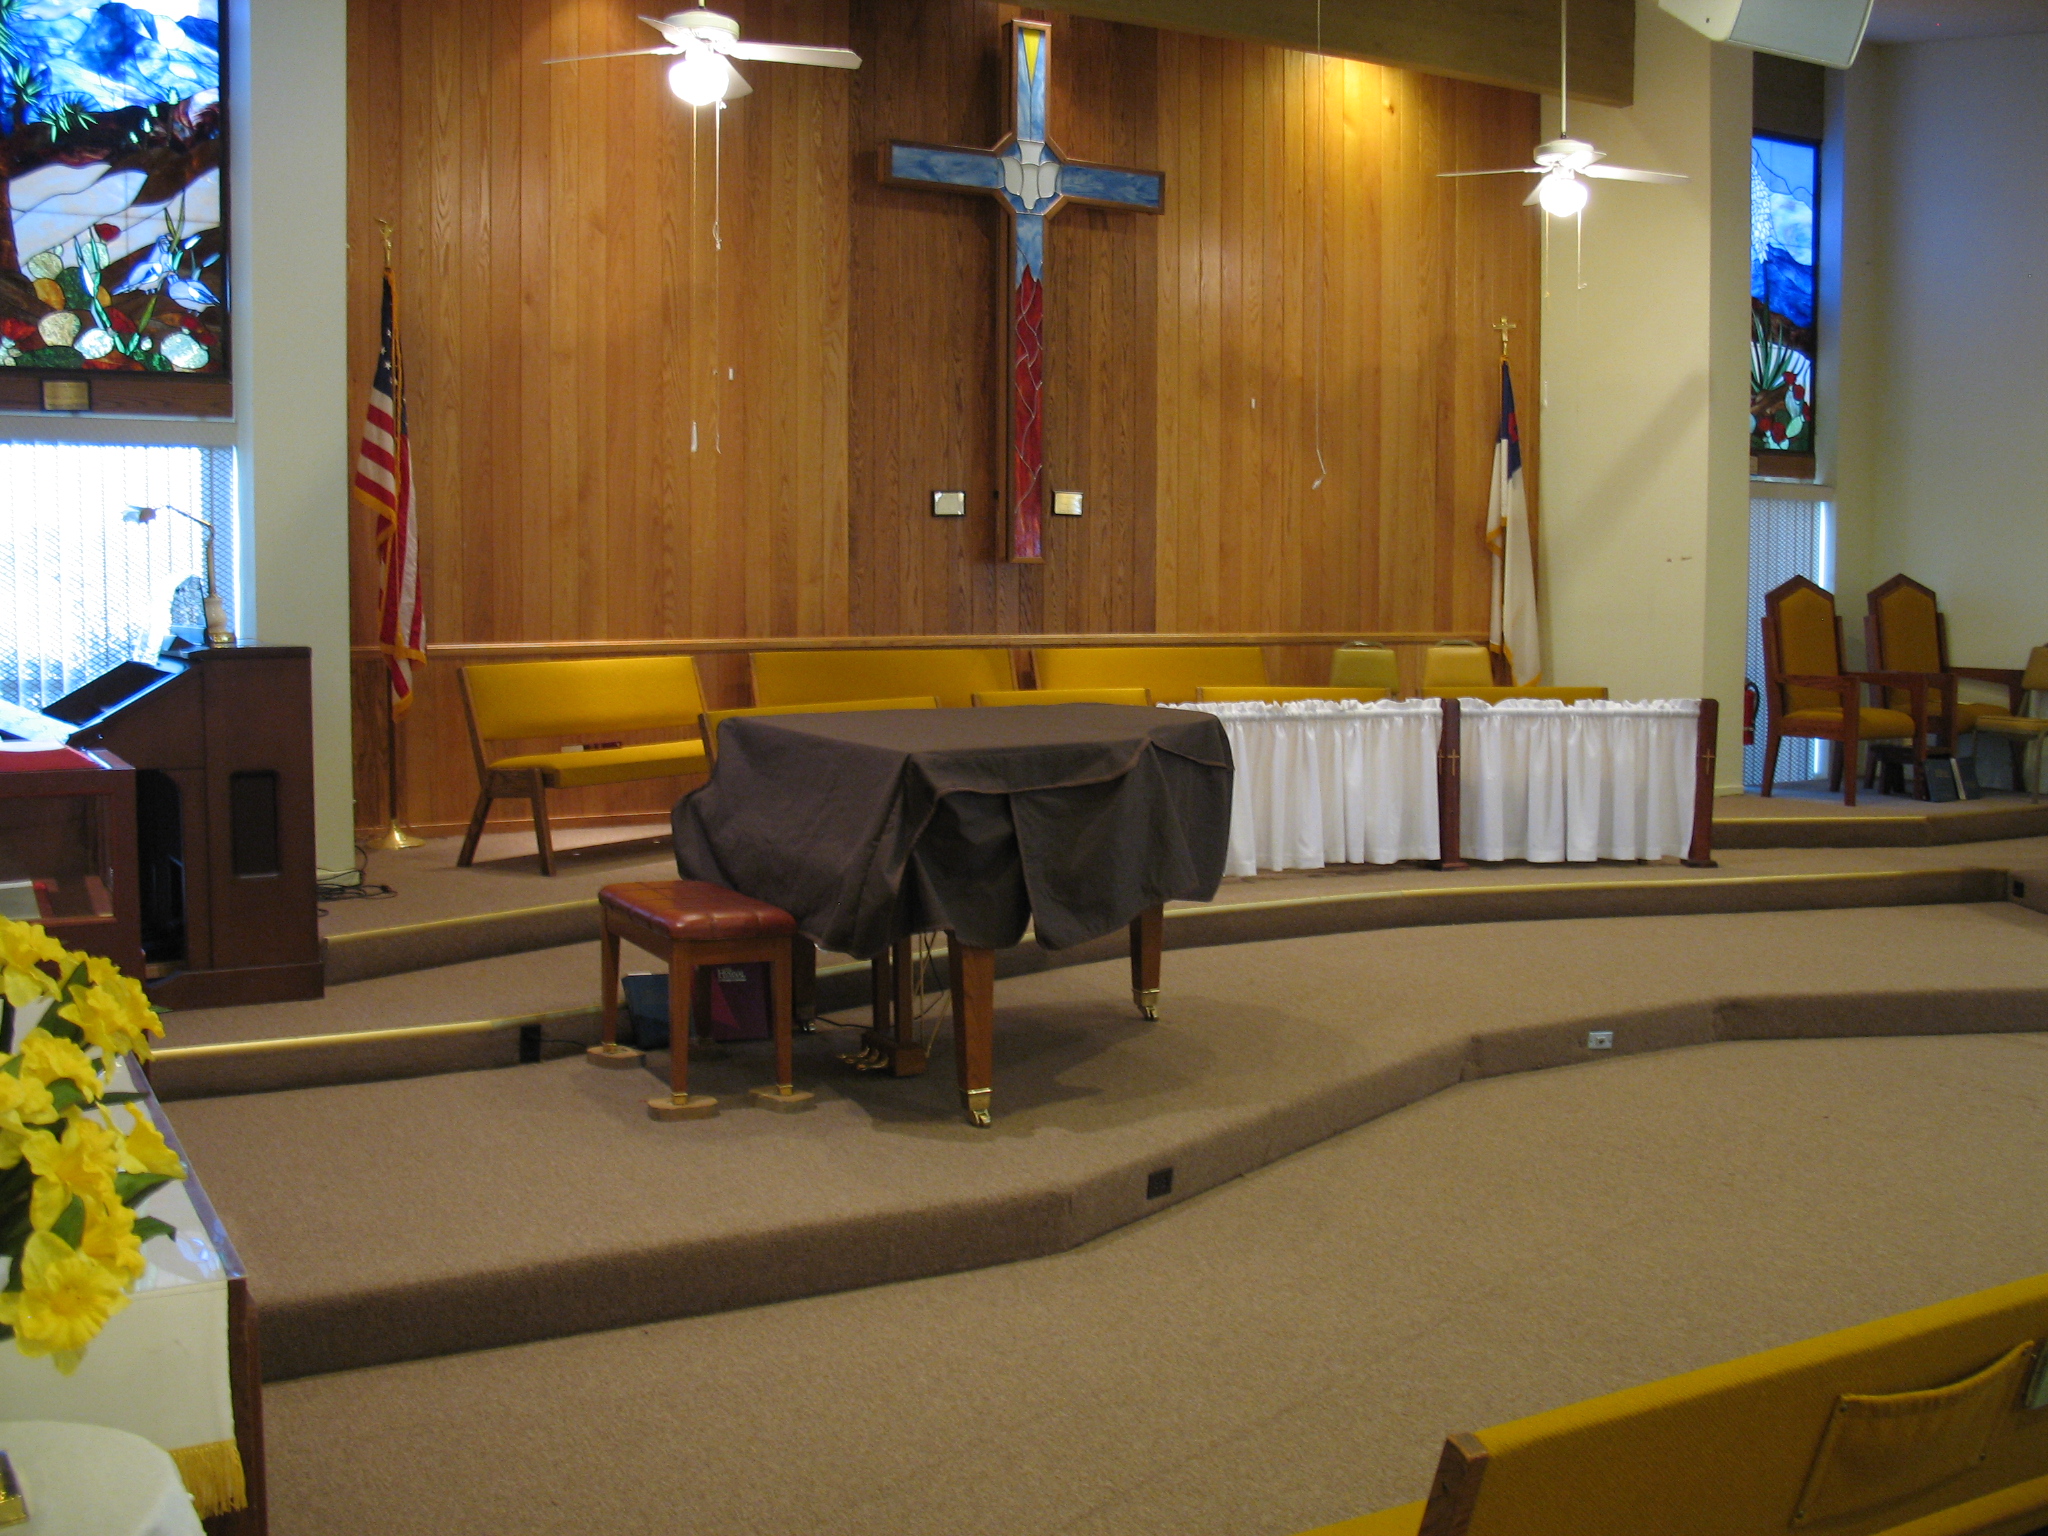 a church has pews with chairs and a sheet covering the area